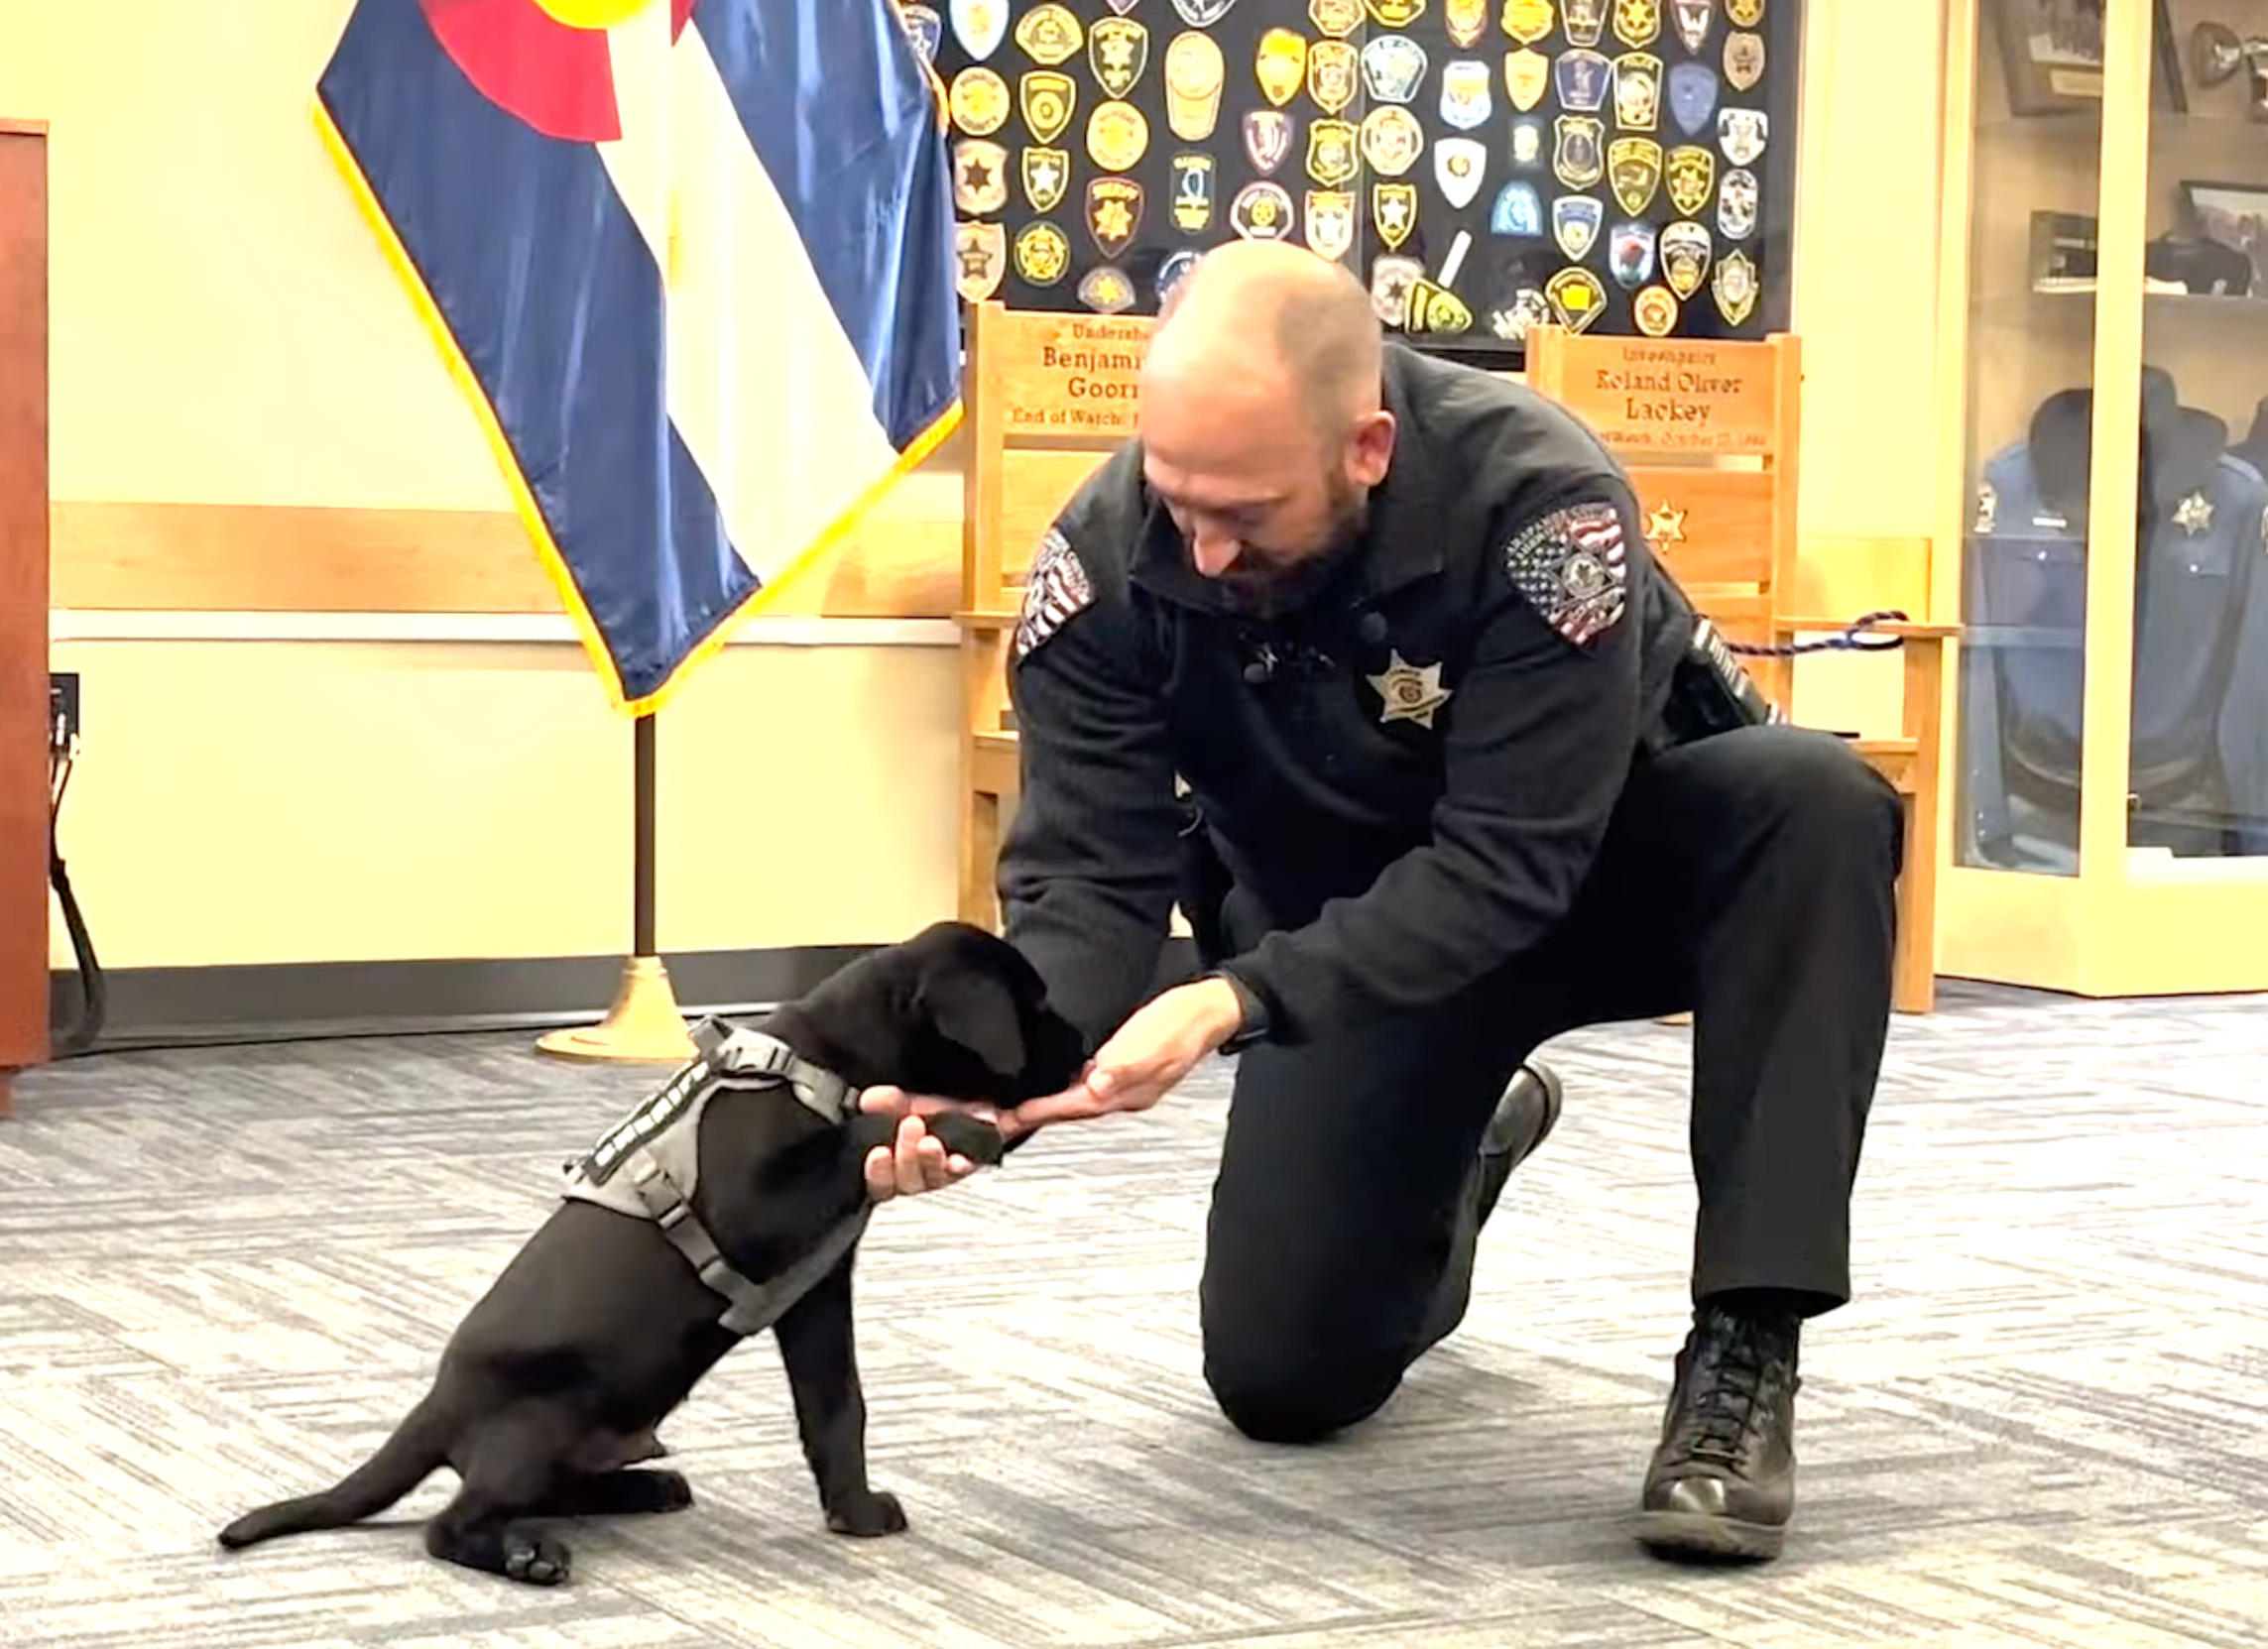 K9 Puppy Melts Hearts While Taking a Nap During the Swearing Ceremony